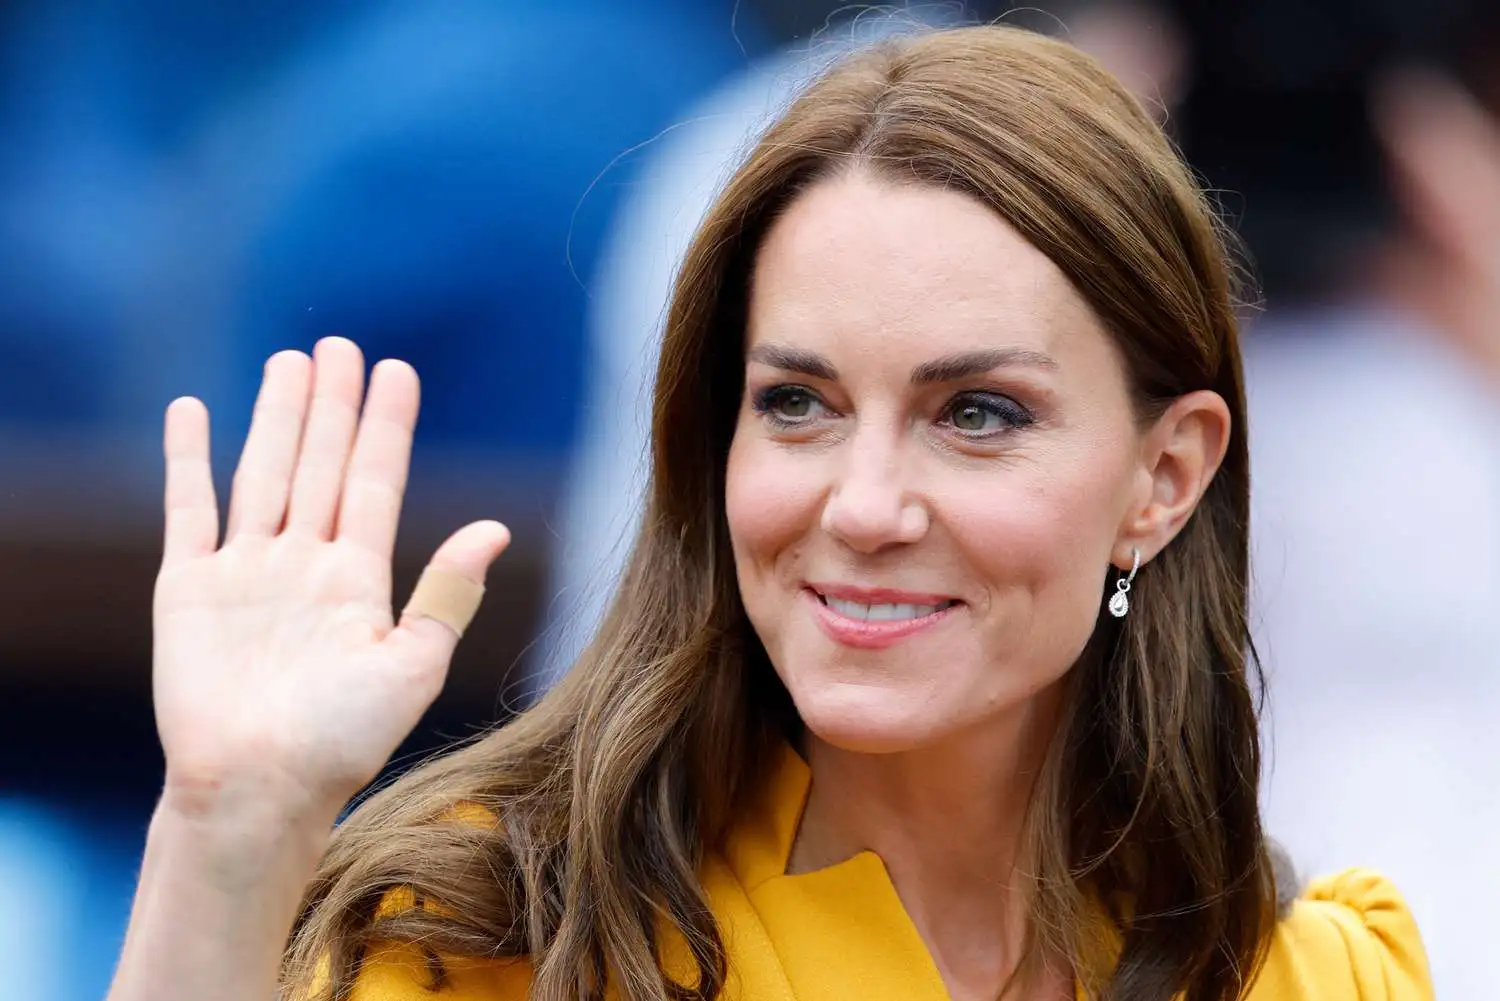 kate-middleton-spotted-in-public-amid-cancer-treatment